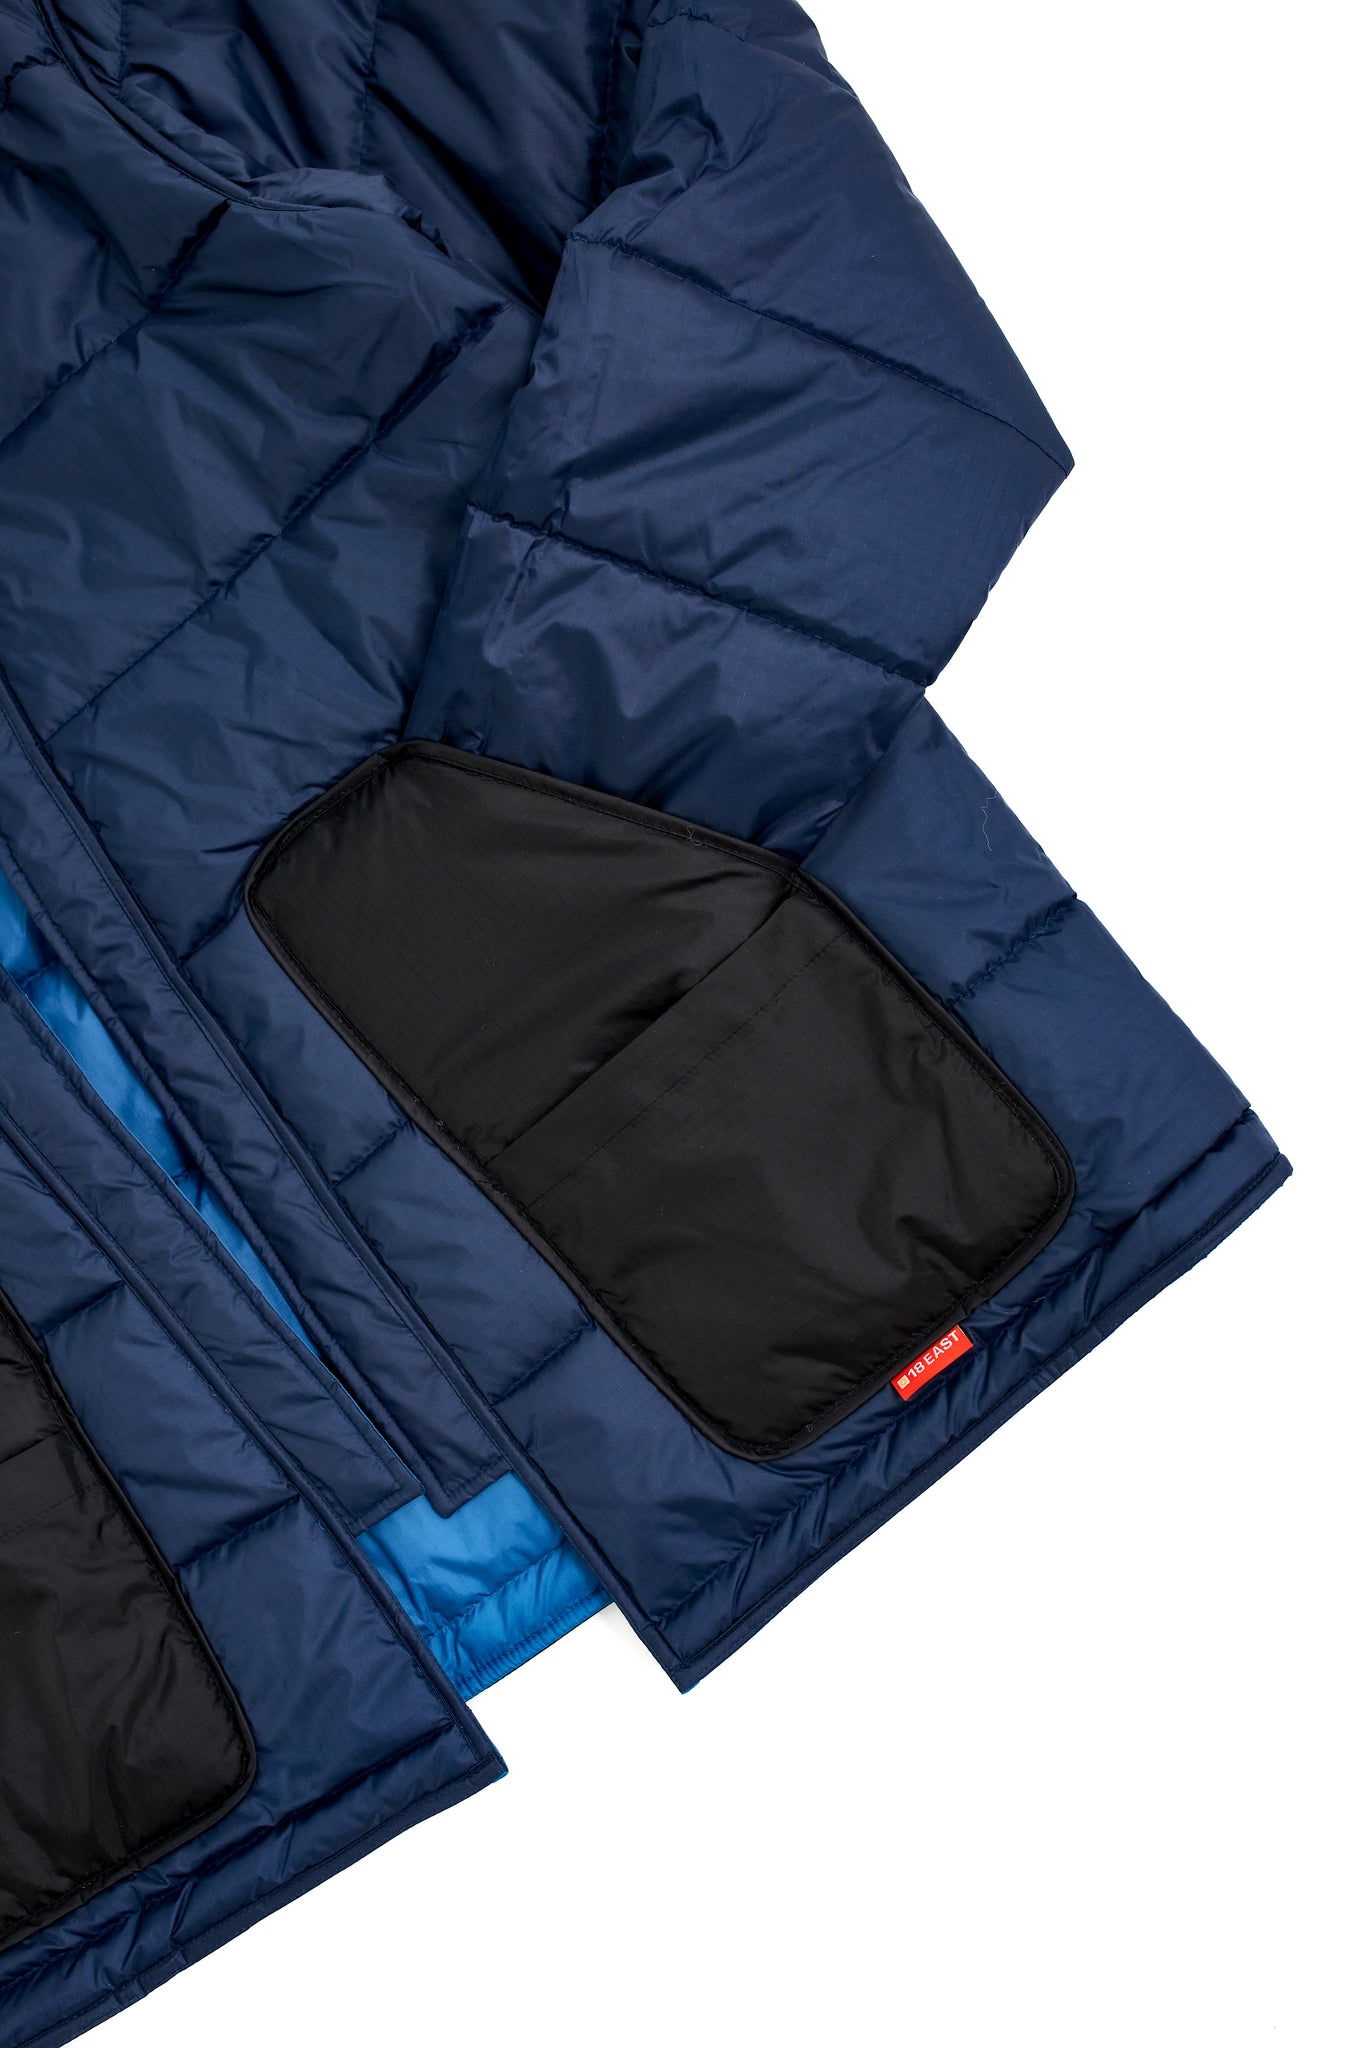 OLIVER REVERSIBLE QUILTED SAHASIKA - NAVY / TURQUOISE NYLON RIPSTOP